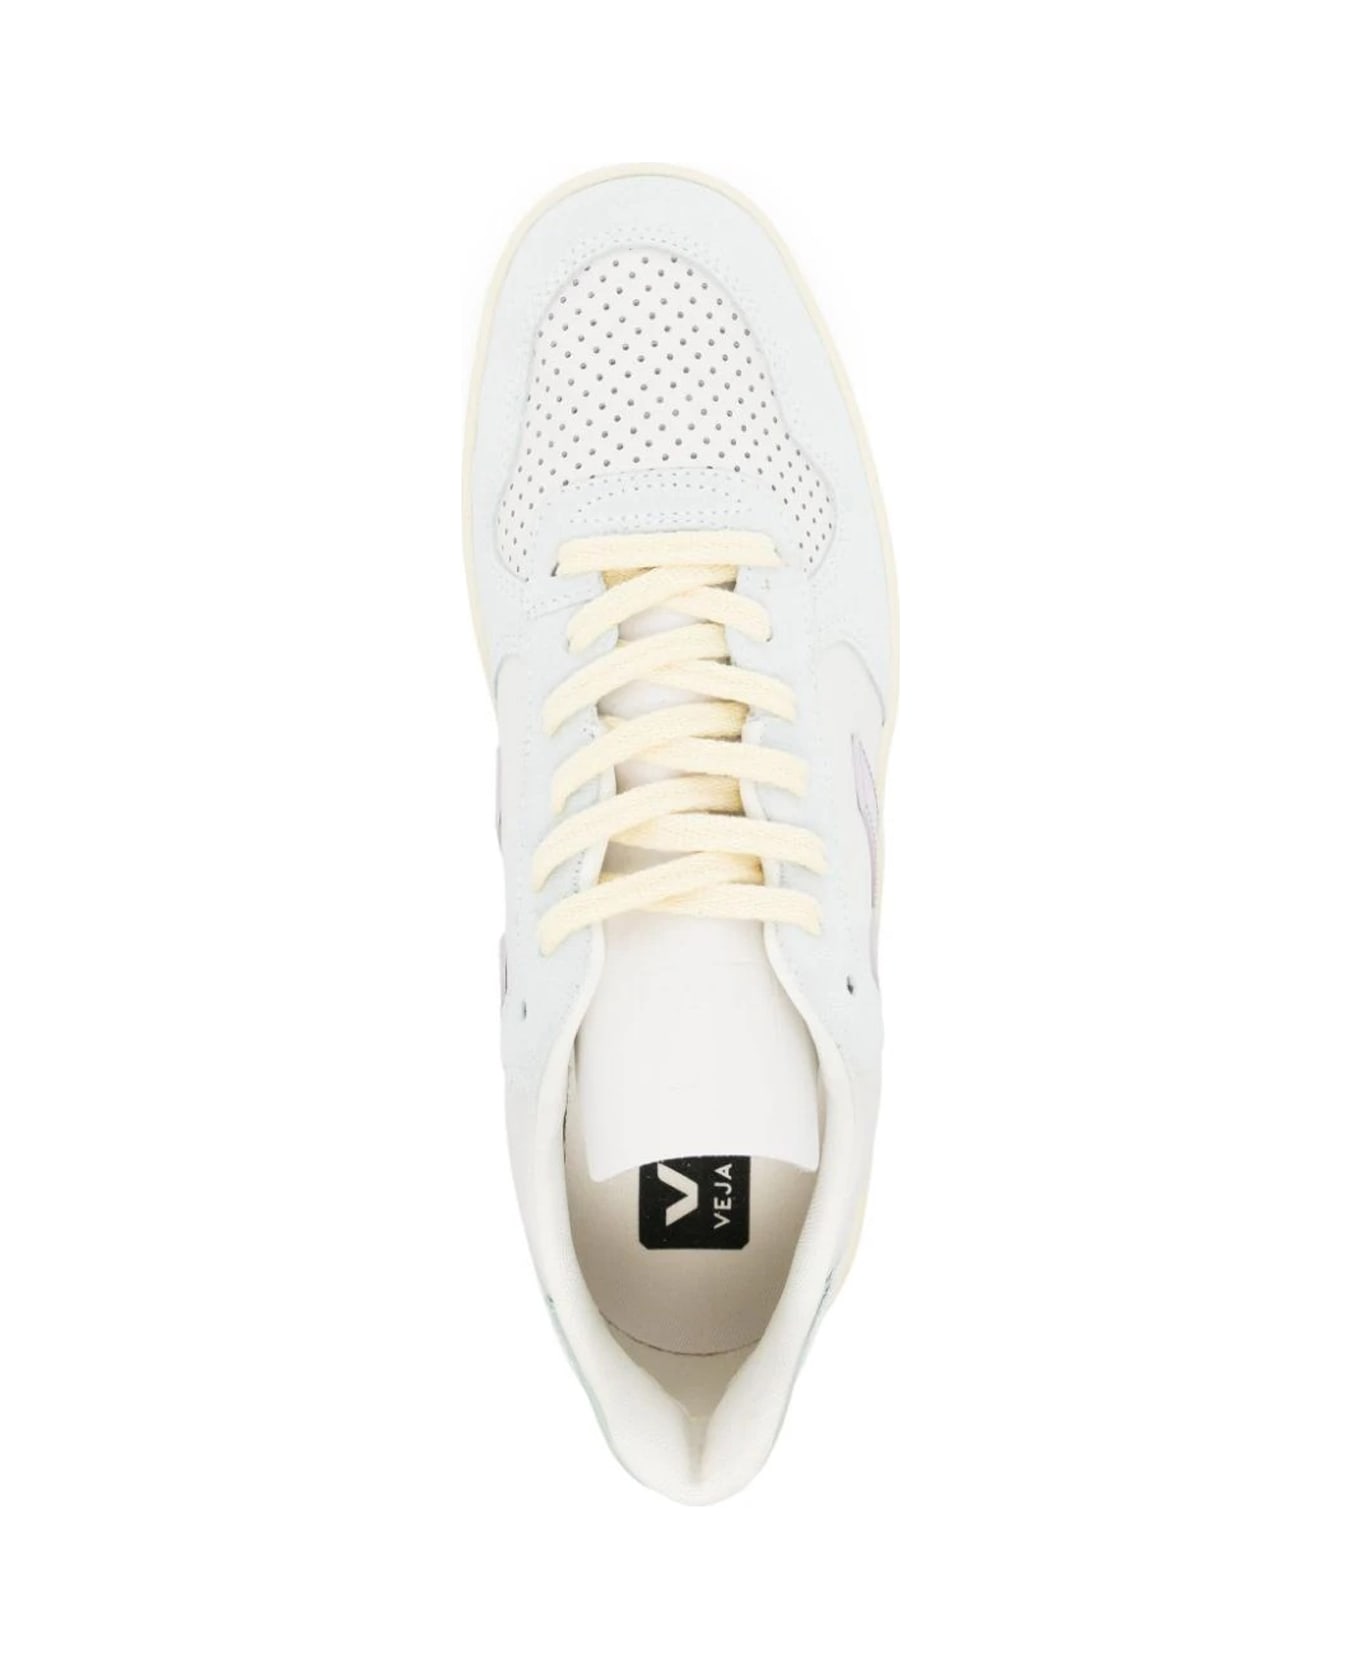 Veja Sneakers - Clear Blue